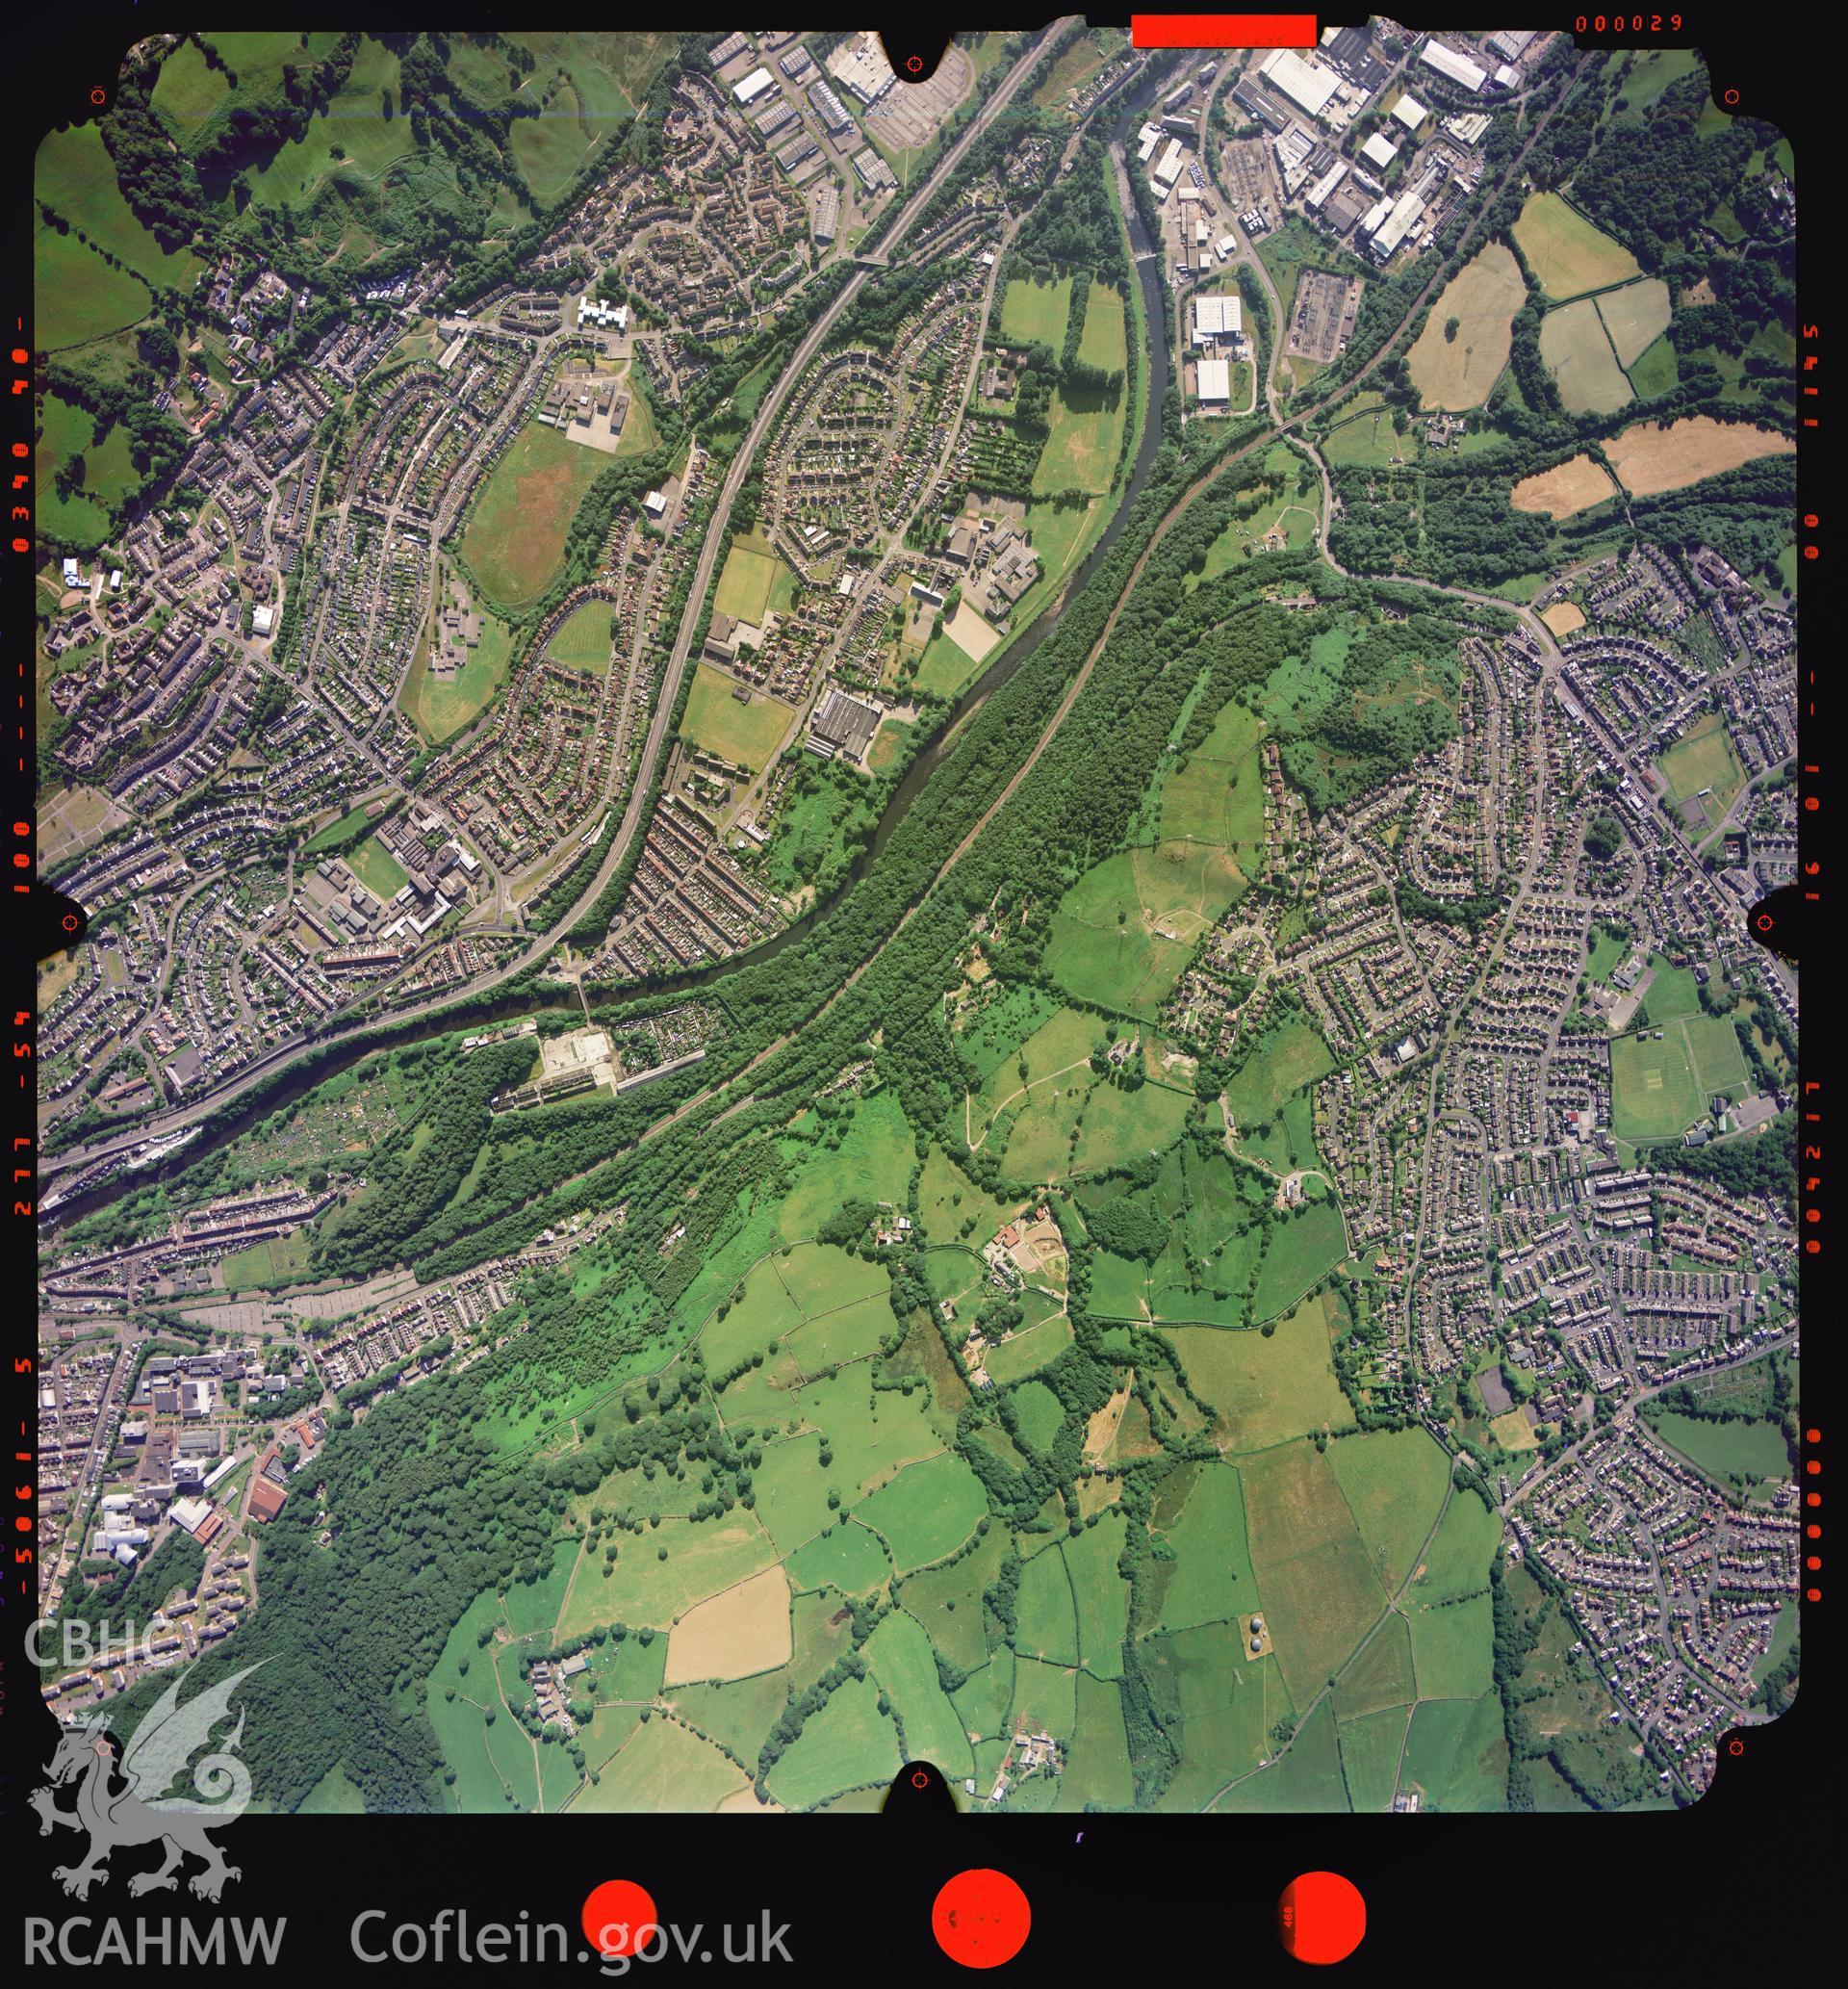 Digitized copy of a colour aerial photograph showing the area around Treforest, taken by Ordnance Survey, 2003.